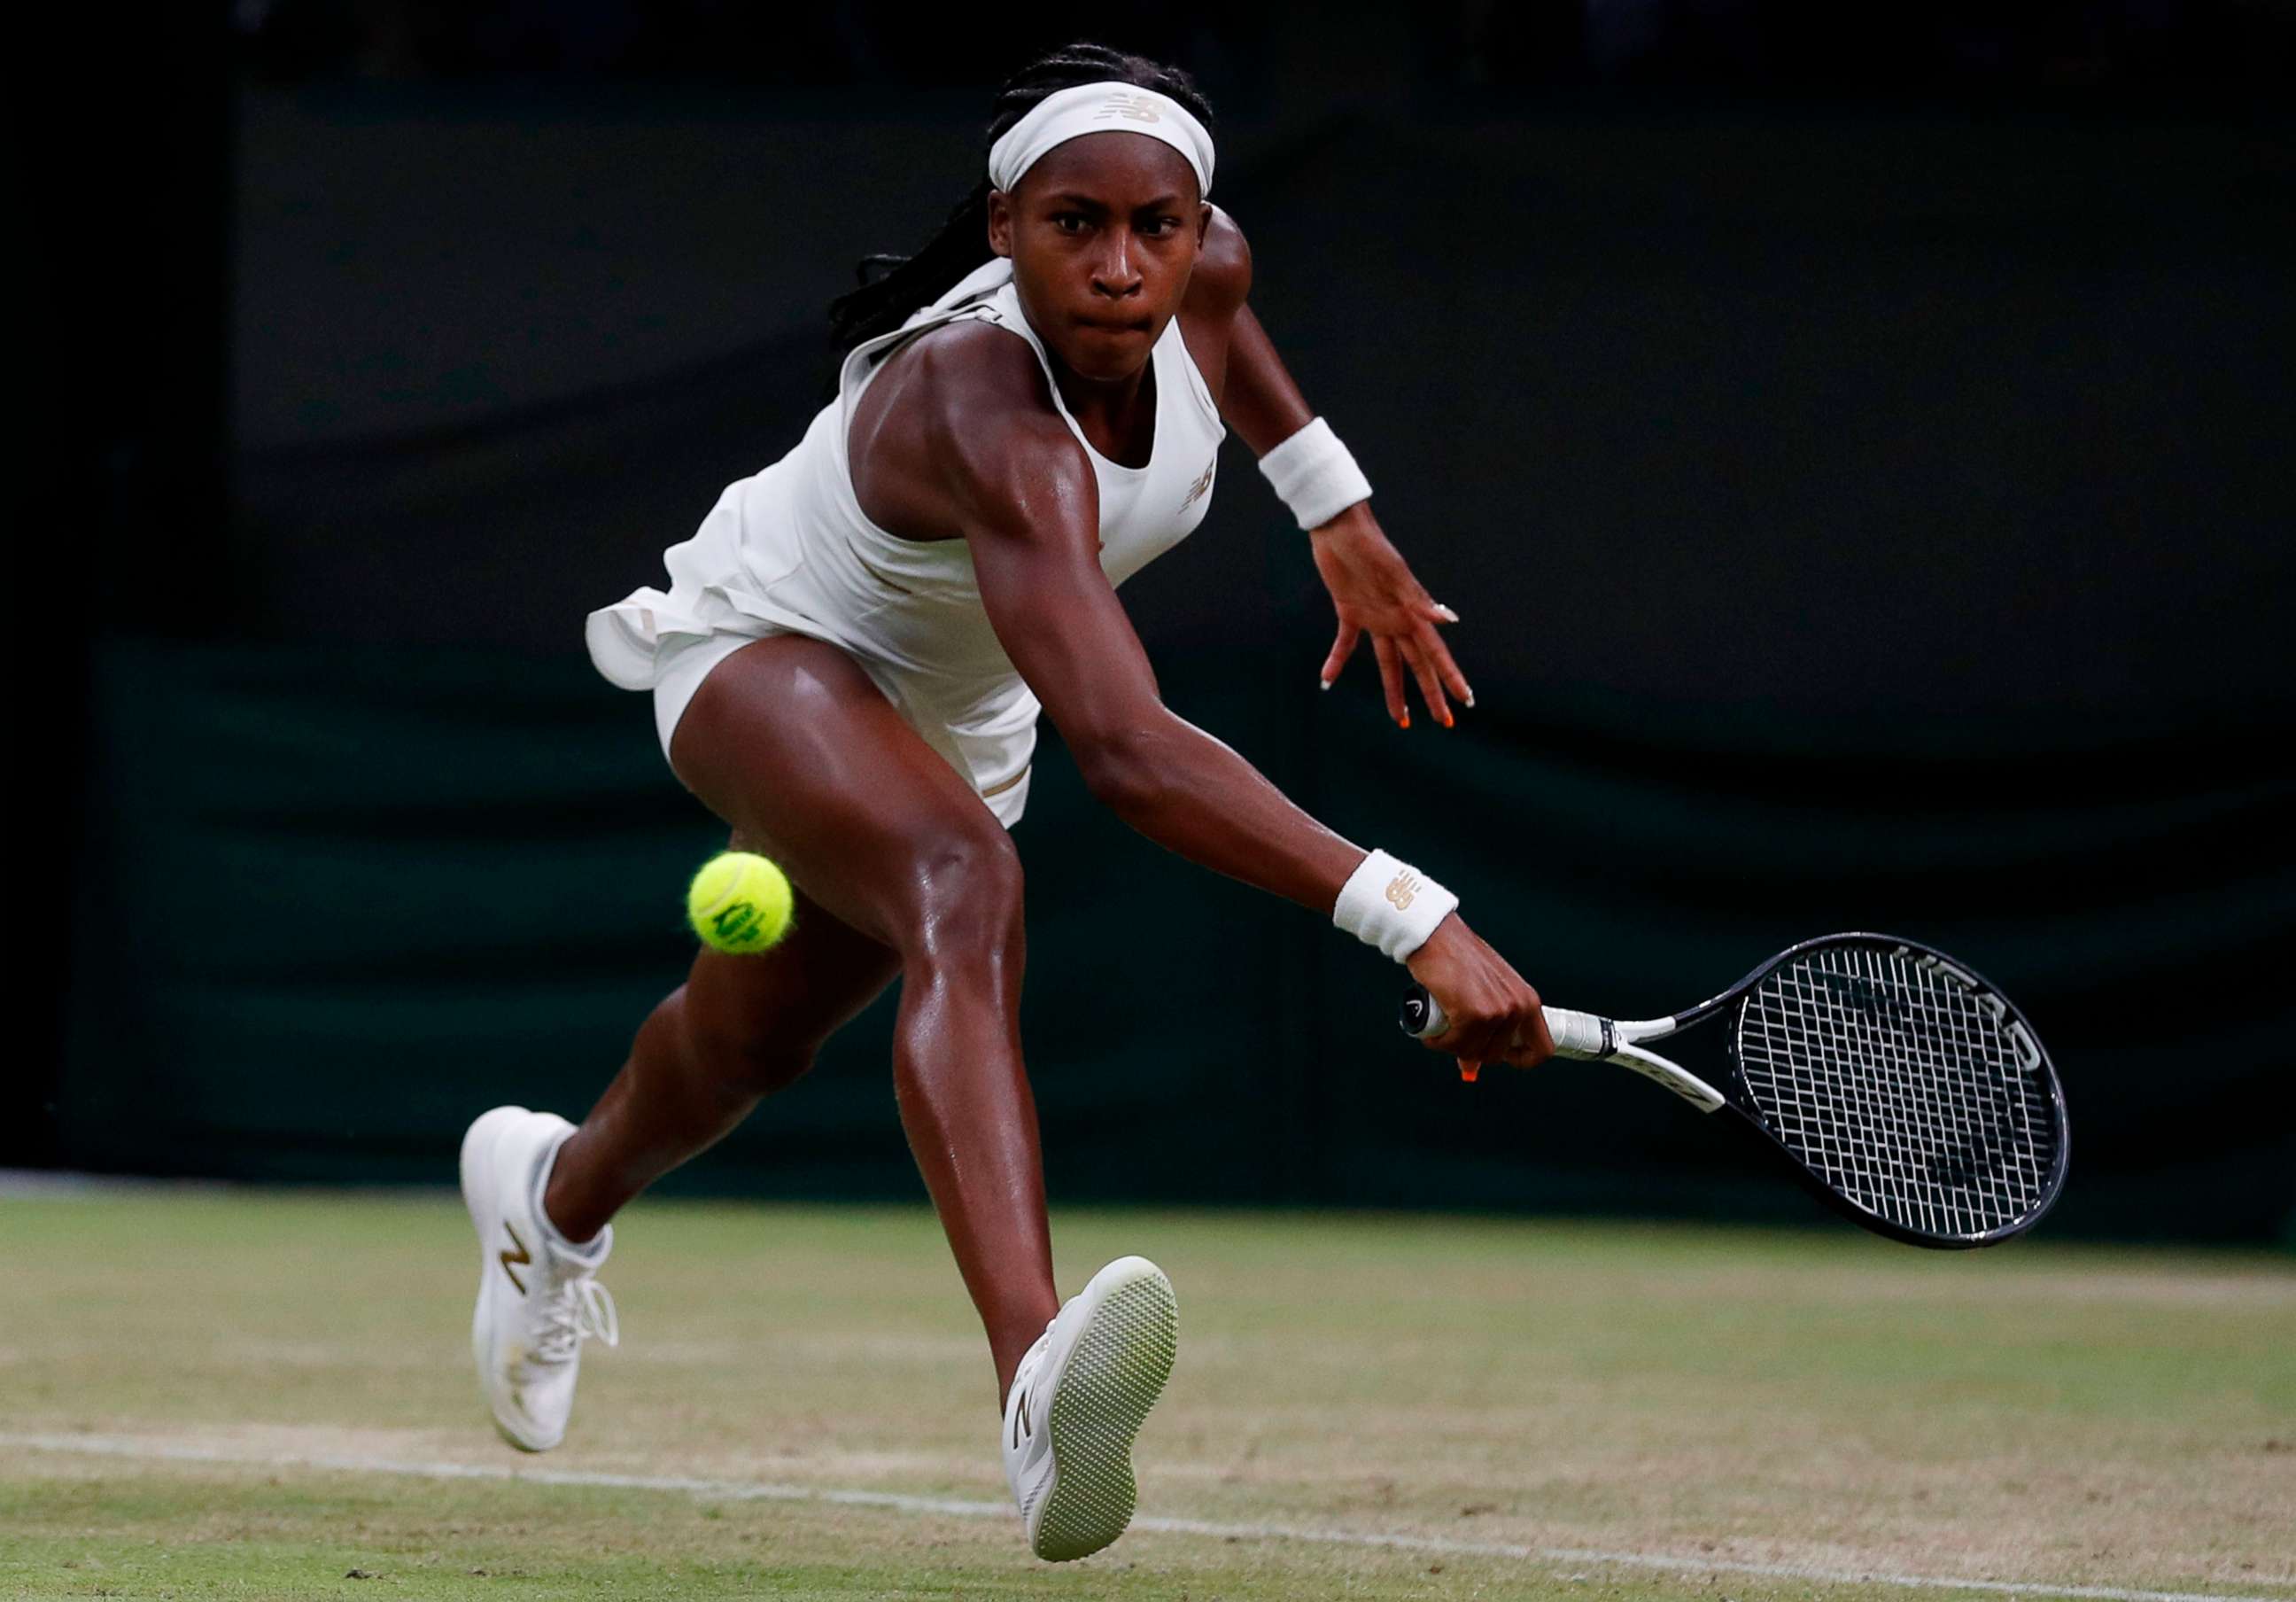 PHOTO: US player Cori Gauff returns against Slovakia's Magdalena Rybarikova during their women's singles second round match on the third day of the 2019 Wimbledon Championships at The All England Lawn Tennis Club in Wimbledon.